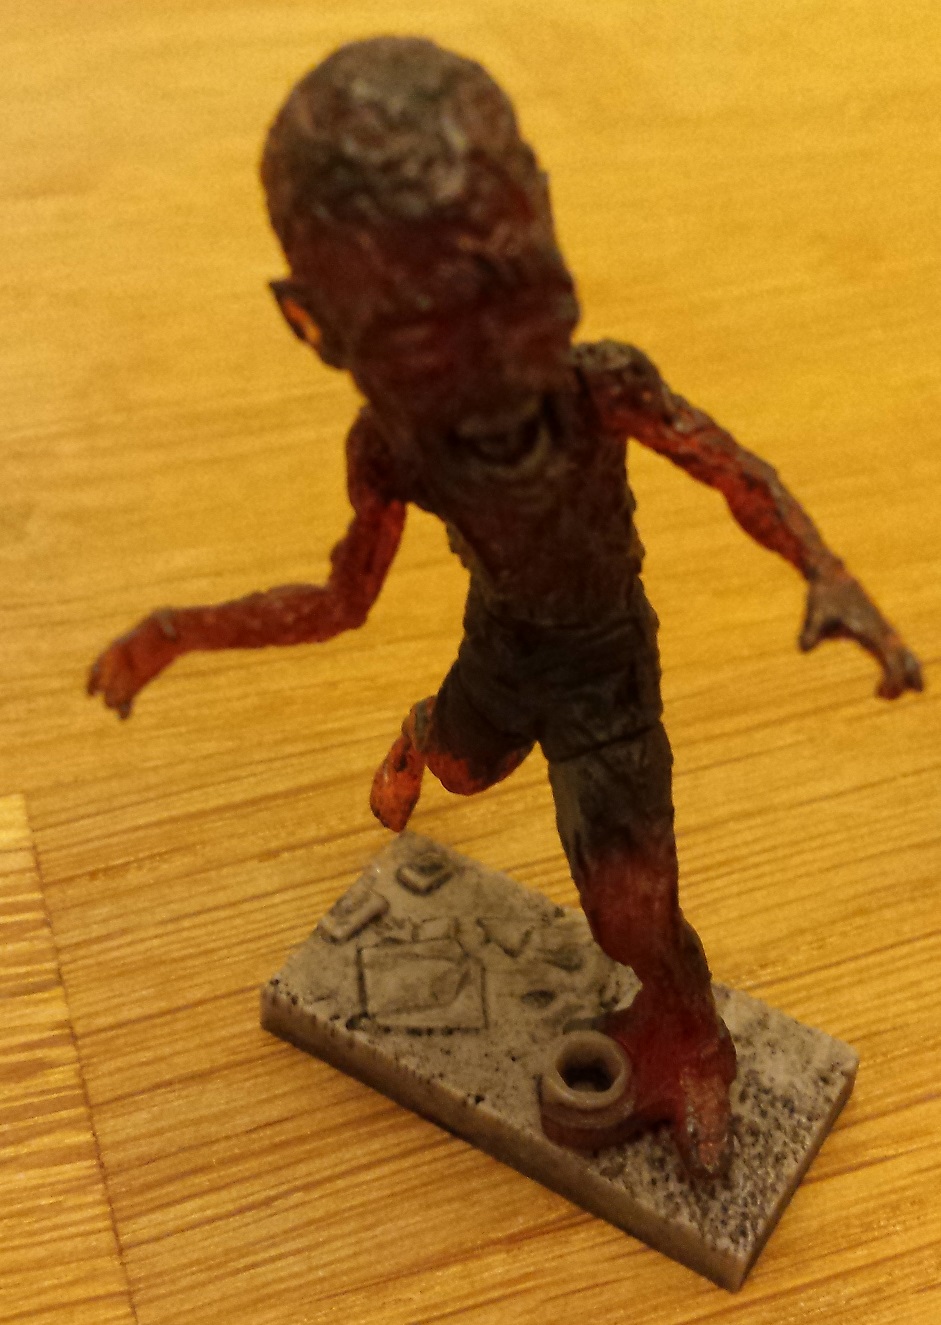 Walking dead zombie mini, theme dead, deadpool, february's loot crate, loot crate review, loot crate unboxing, the walking dead